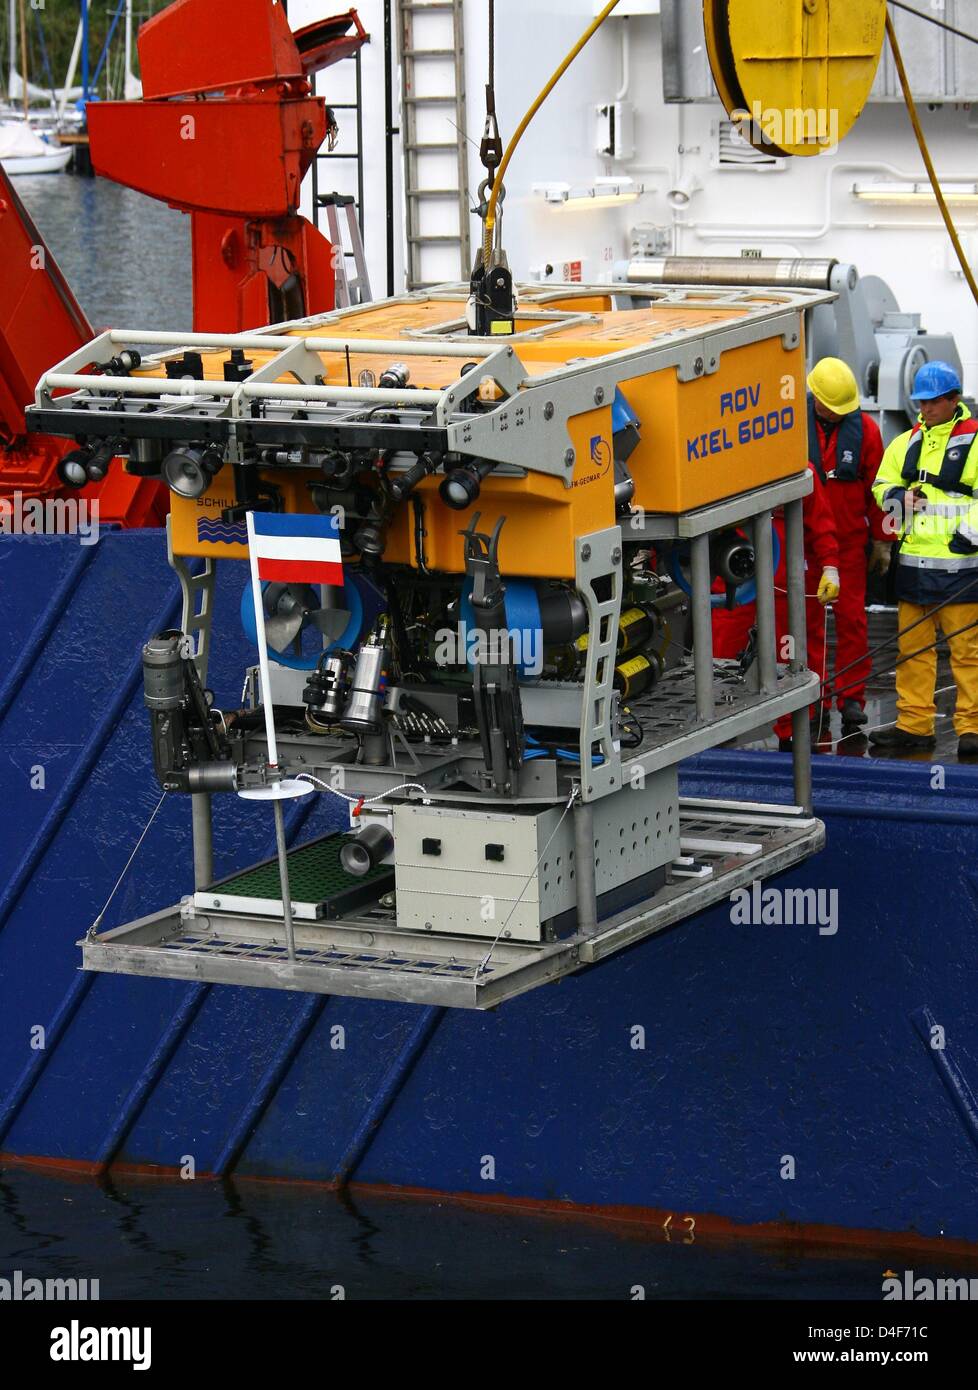 The new research robot 'ROV Kiel 6000' is lowered into the water in Kiel,  Germany, 16 June 2008. With the new diving robot sea researchers are able  to explore more than 90